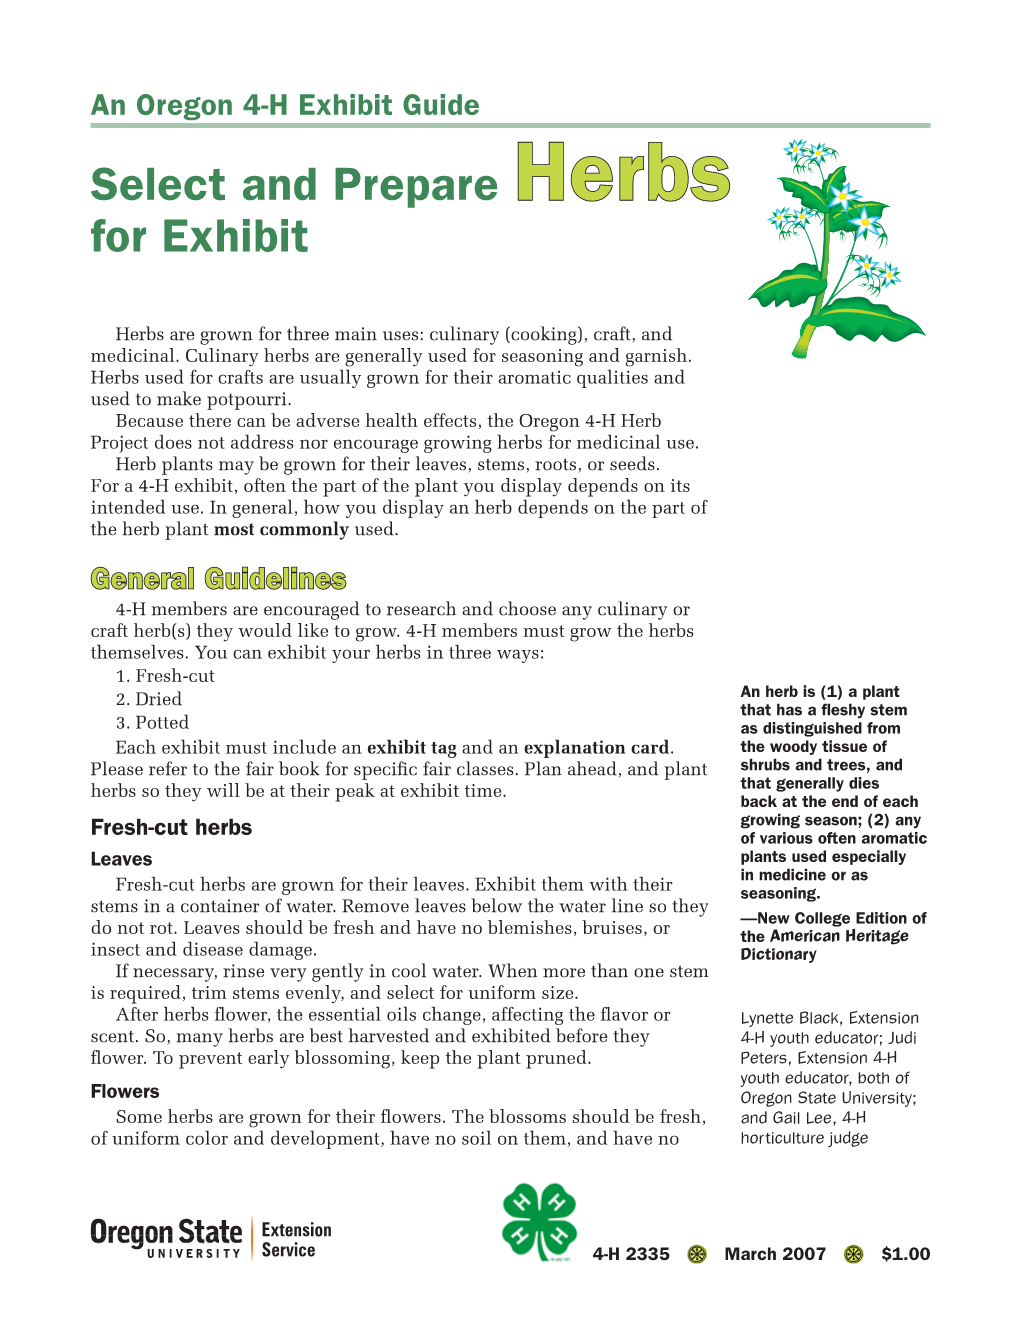 Select and Prepare Herbs for Exhibit